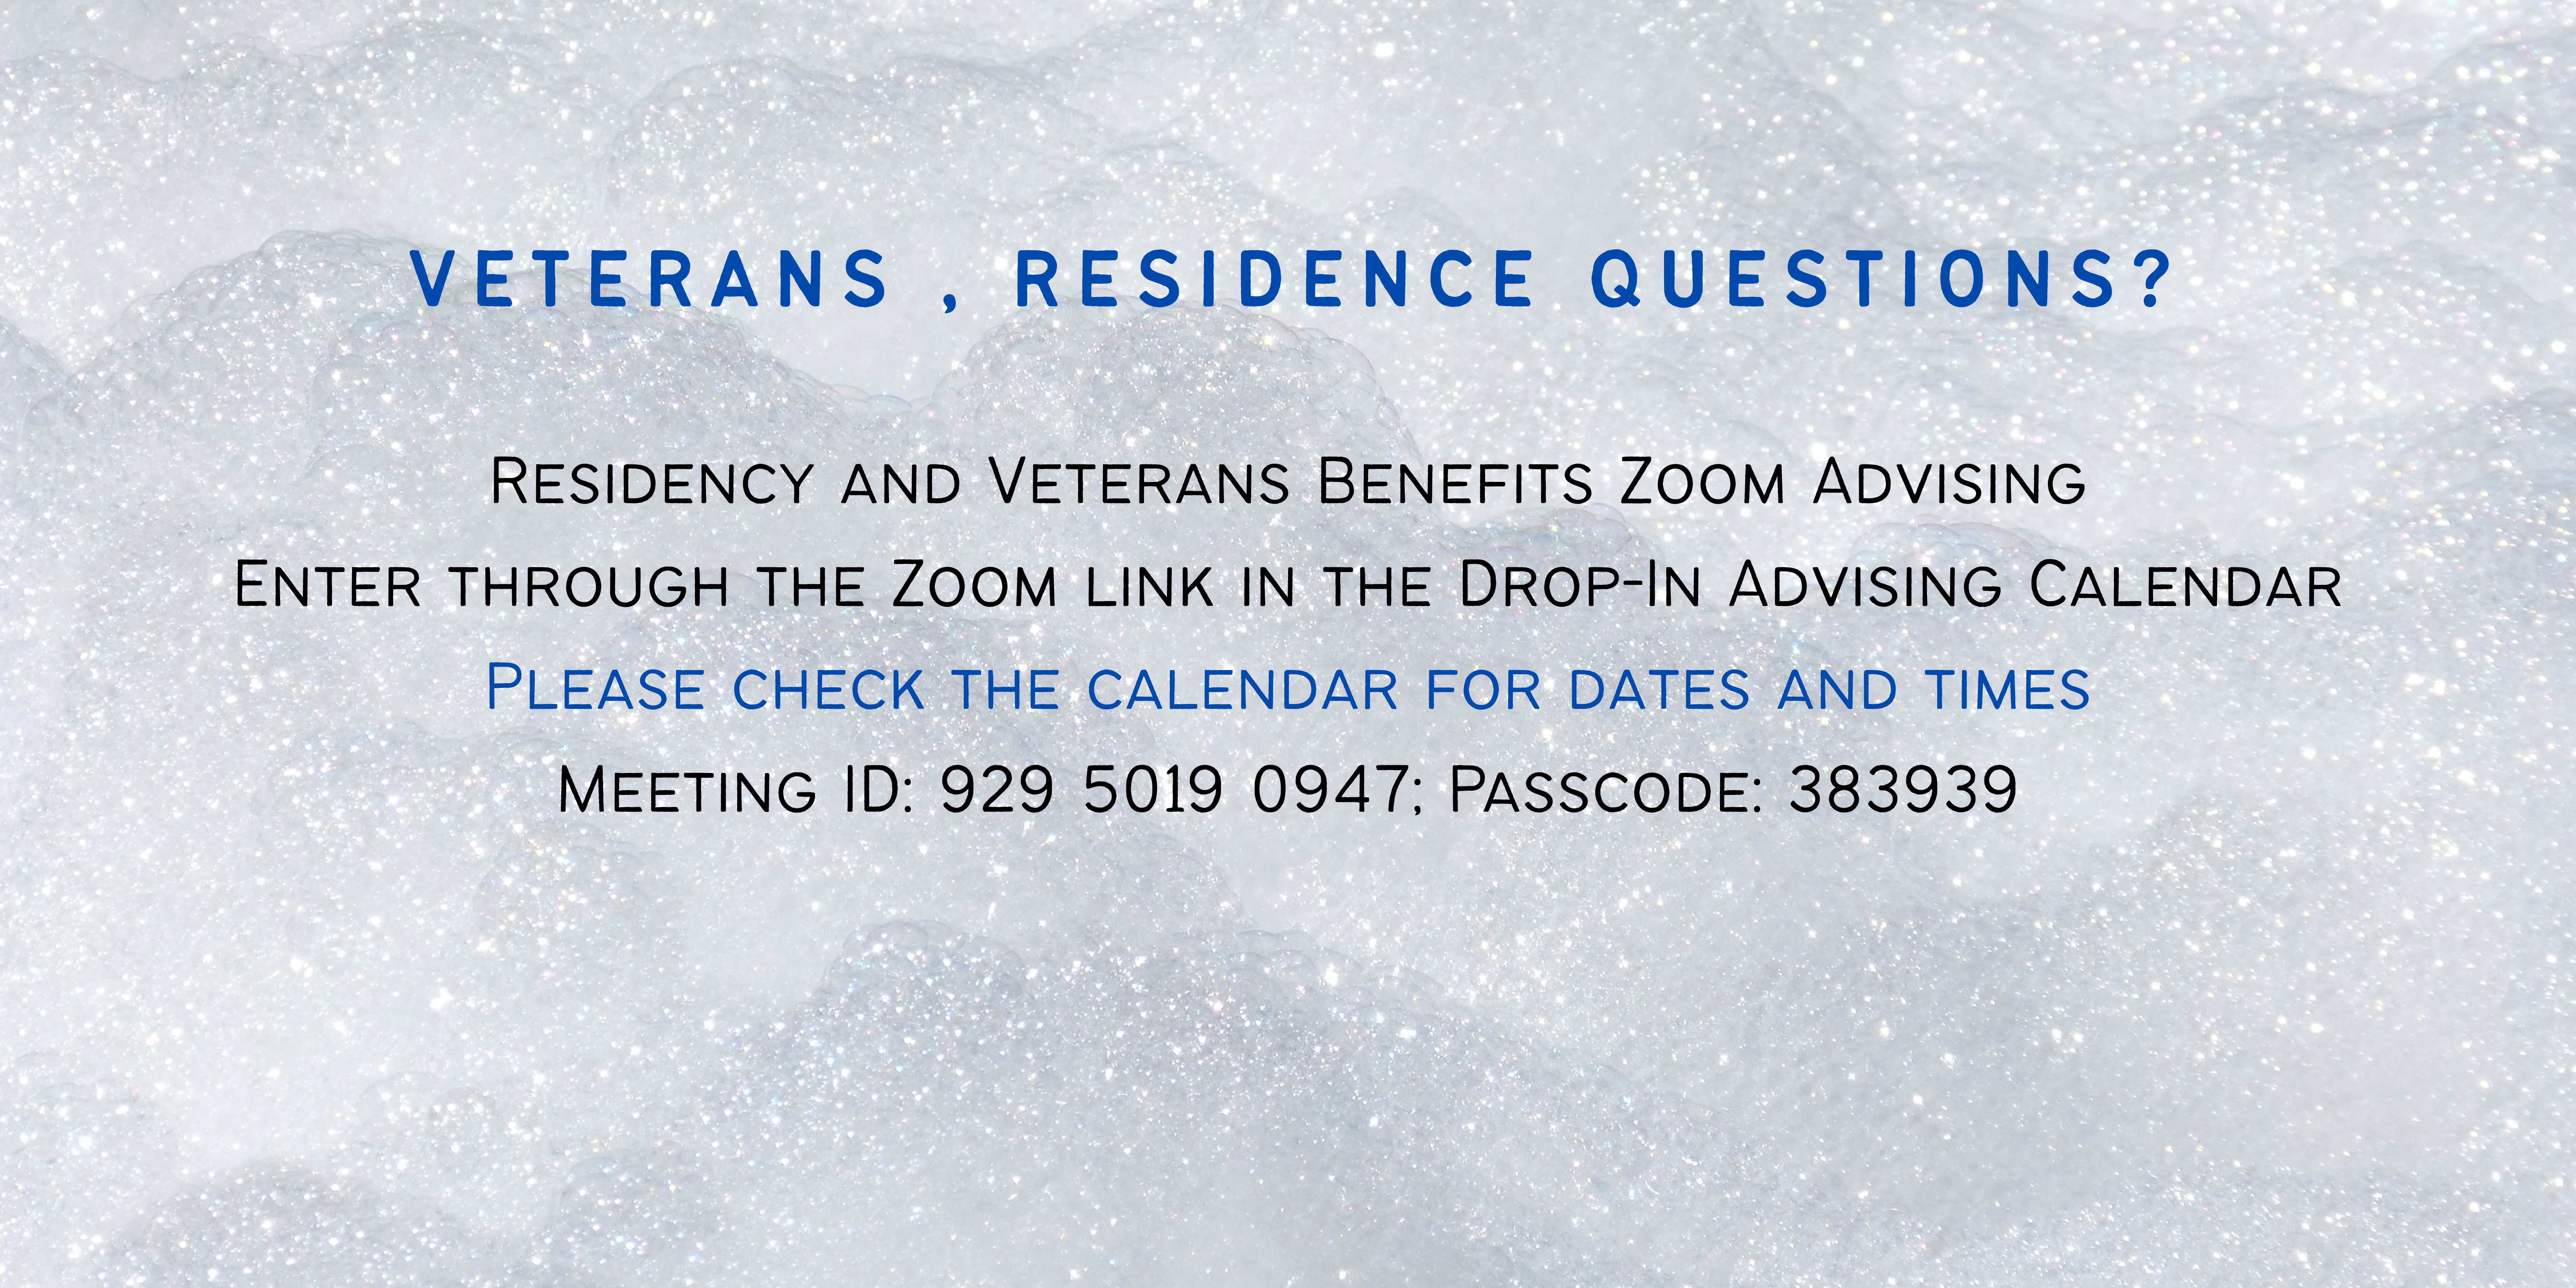 Drop-in advising for veterans and residency questions is available by Zoom meeting on Mondays and Wednesdays from 11:00 a.m. to 12:00 p.m., and on Tuesdays and Thursdays from 3:00 to 4:00 p.m. Enter through the Zoom link in the Drop-In Advising Calendar at: https://registrar.ucsc.edu/enrollment/veterans/index.html#drop.